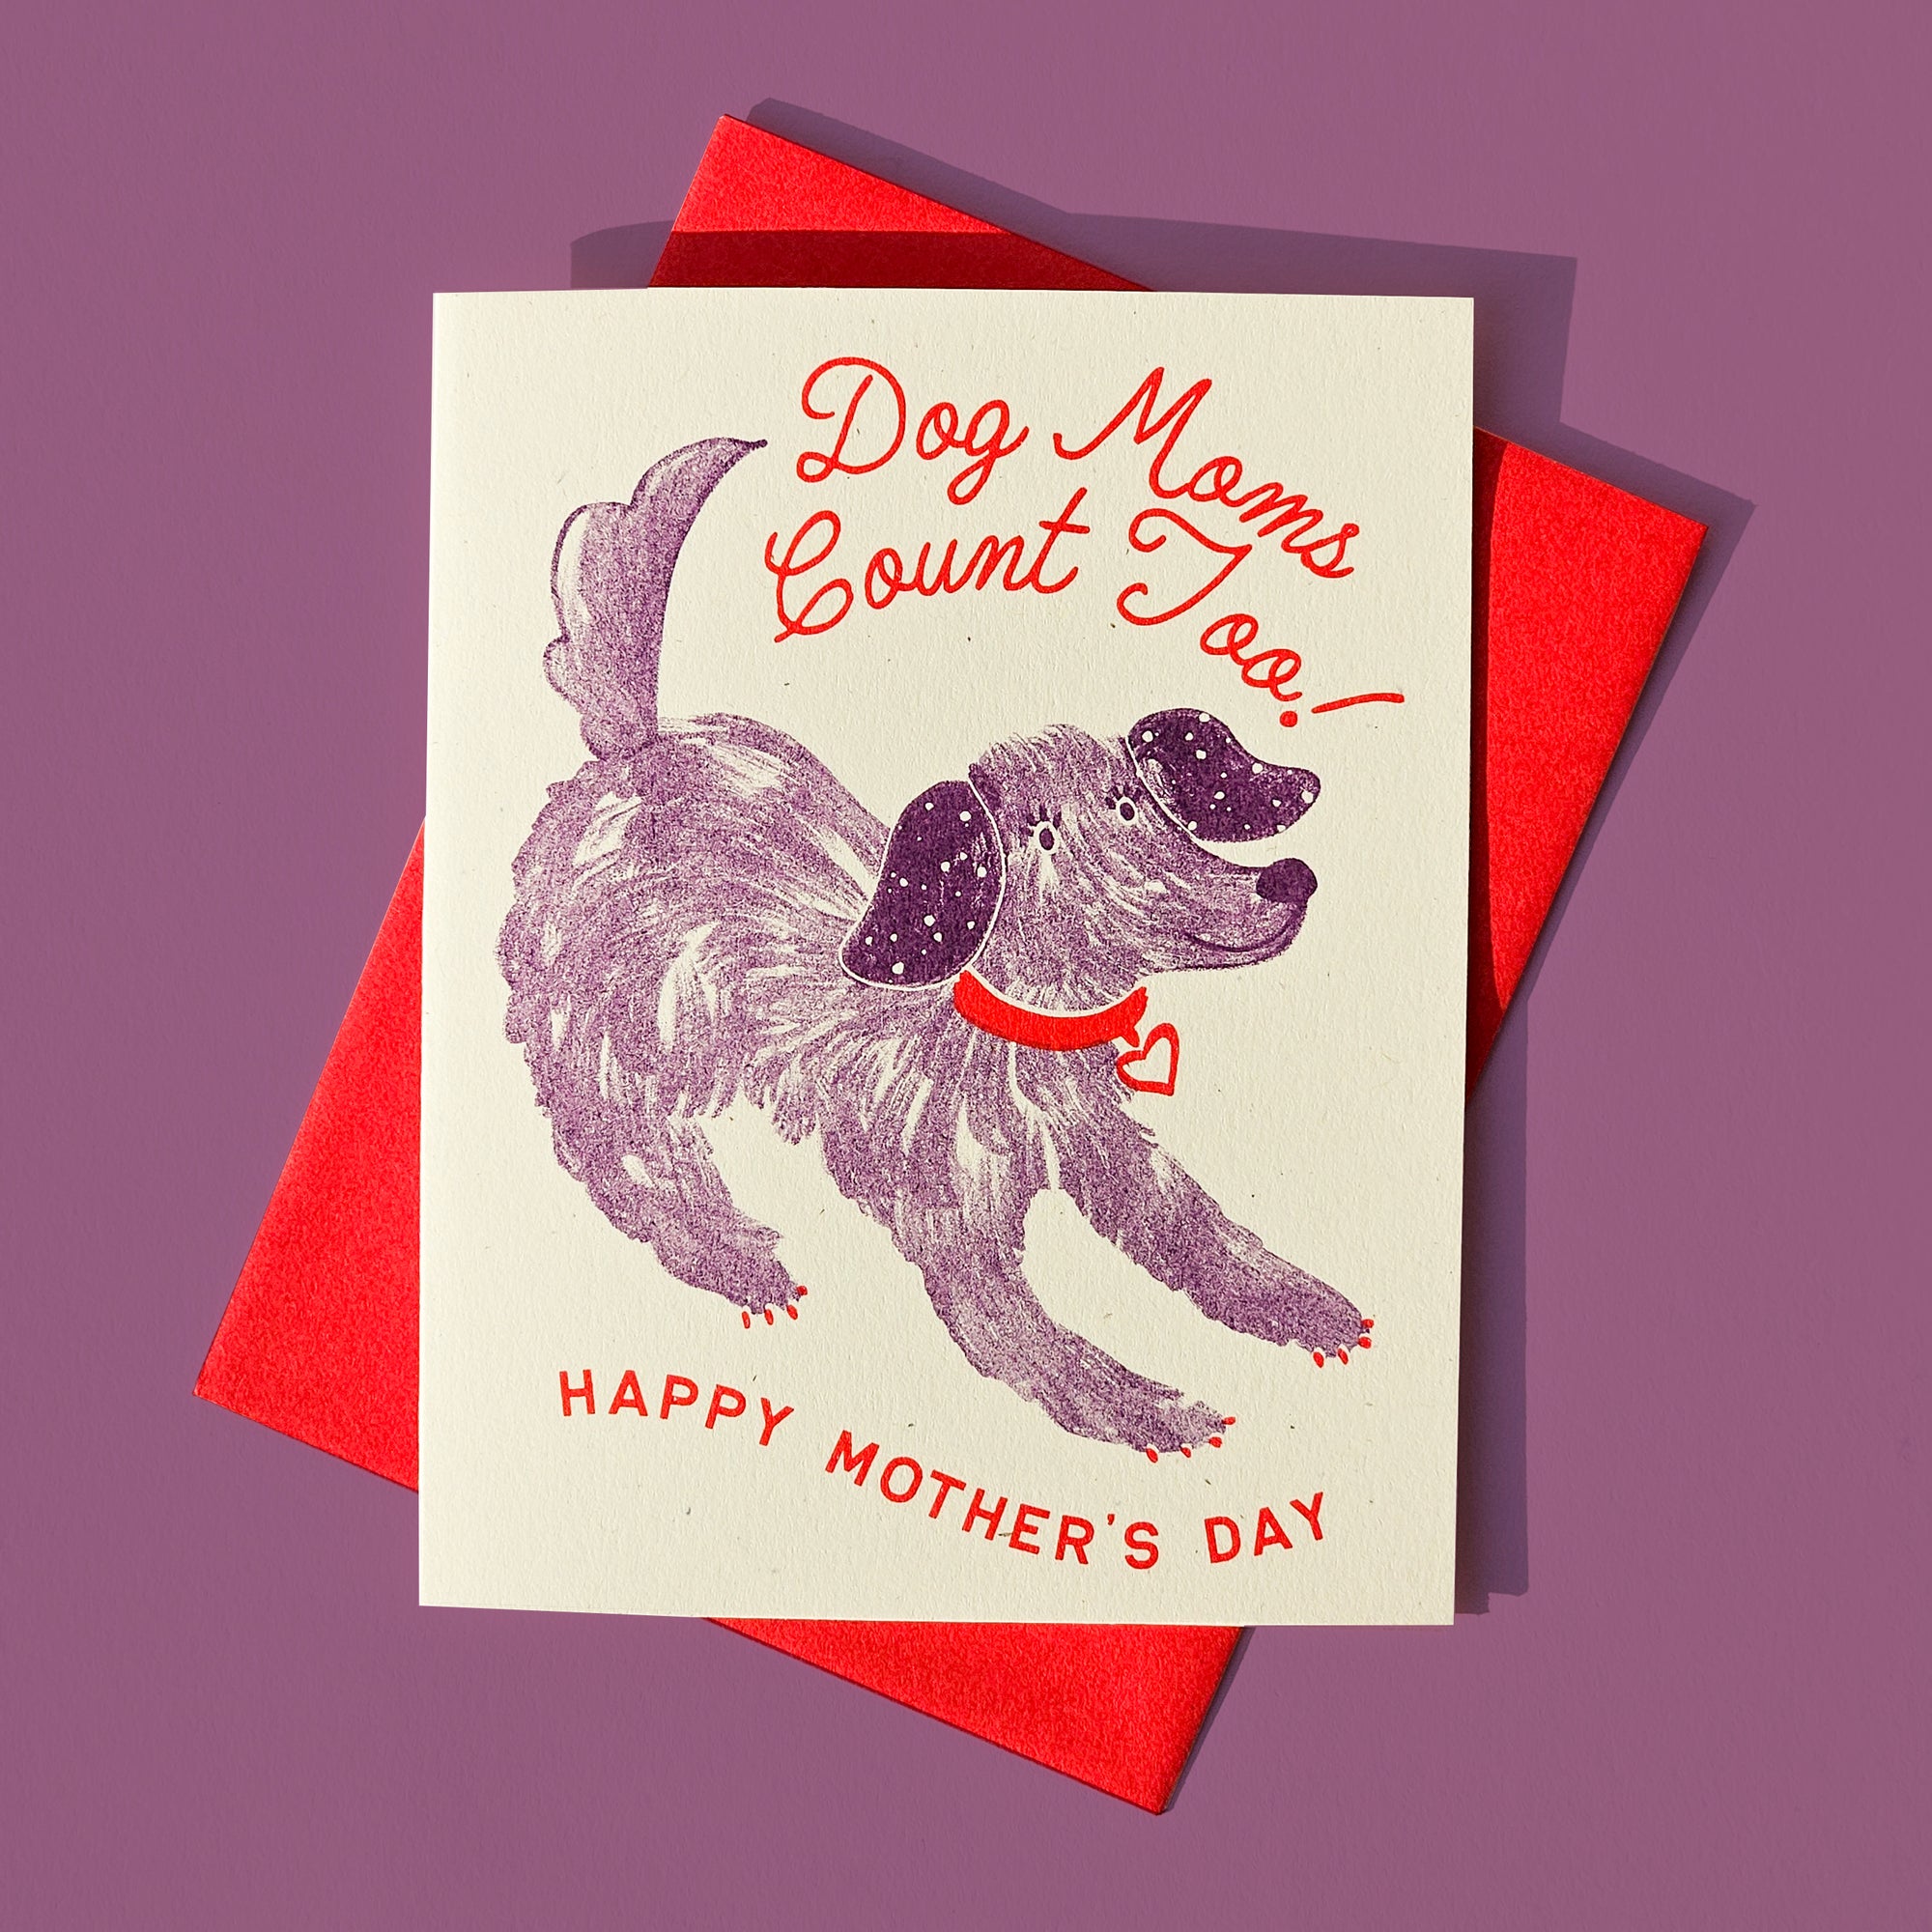 Dog Moms Count Too - Risograph Mother's Day Card